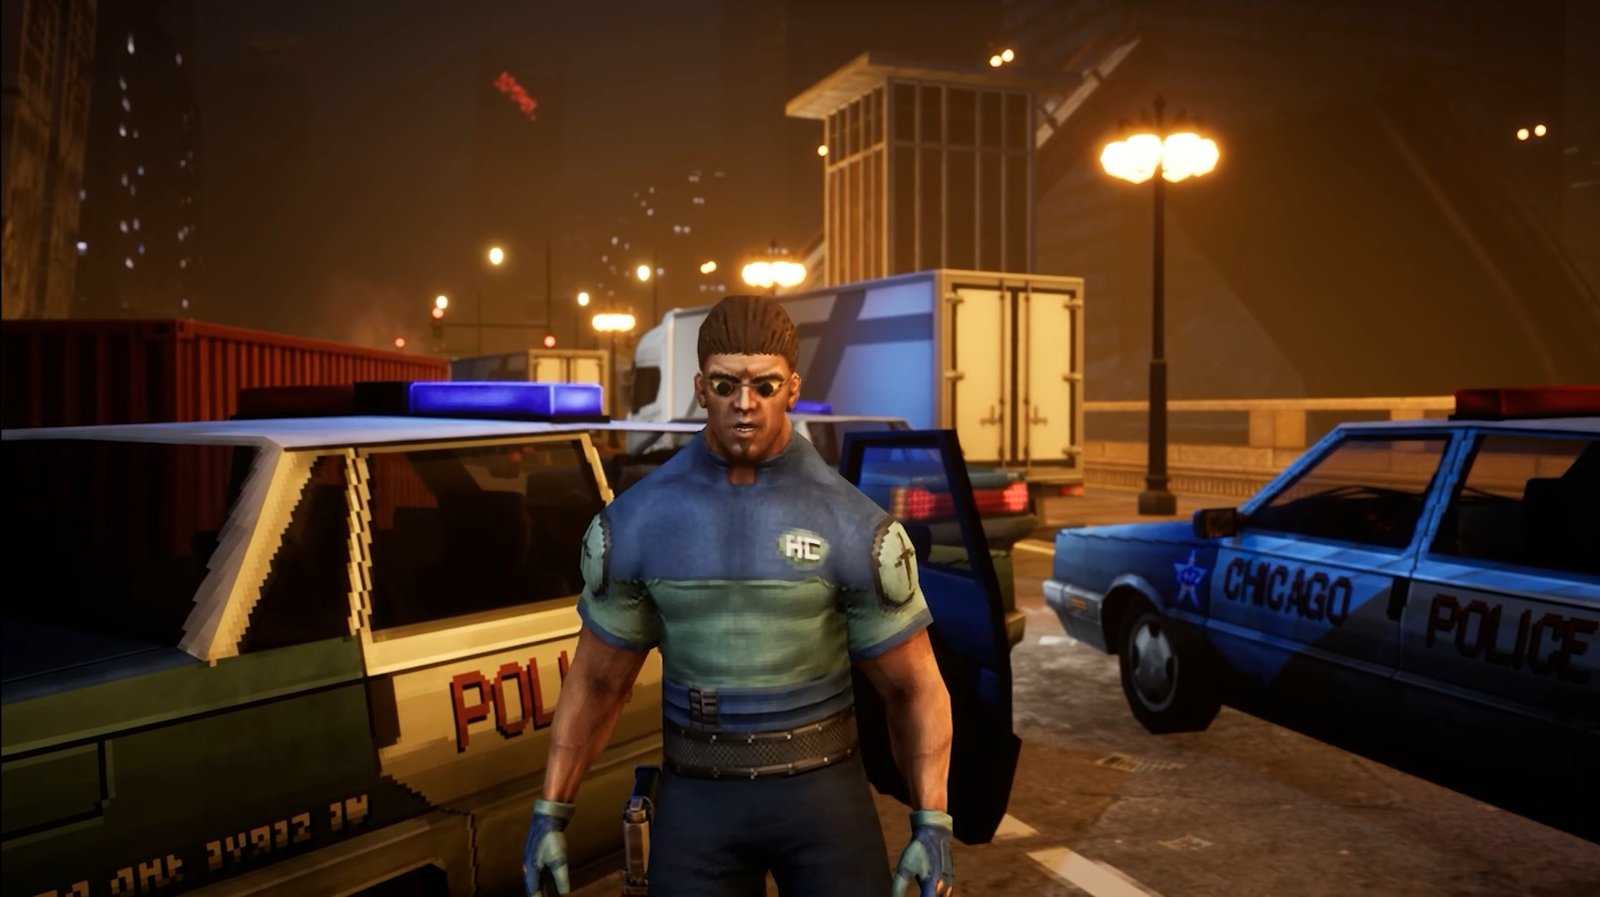 Futuristic cybercop with robot eyes stands before gathered CPD cars with nighttime city and streetlights in background.